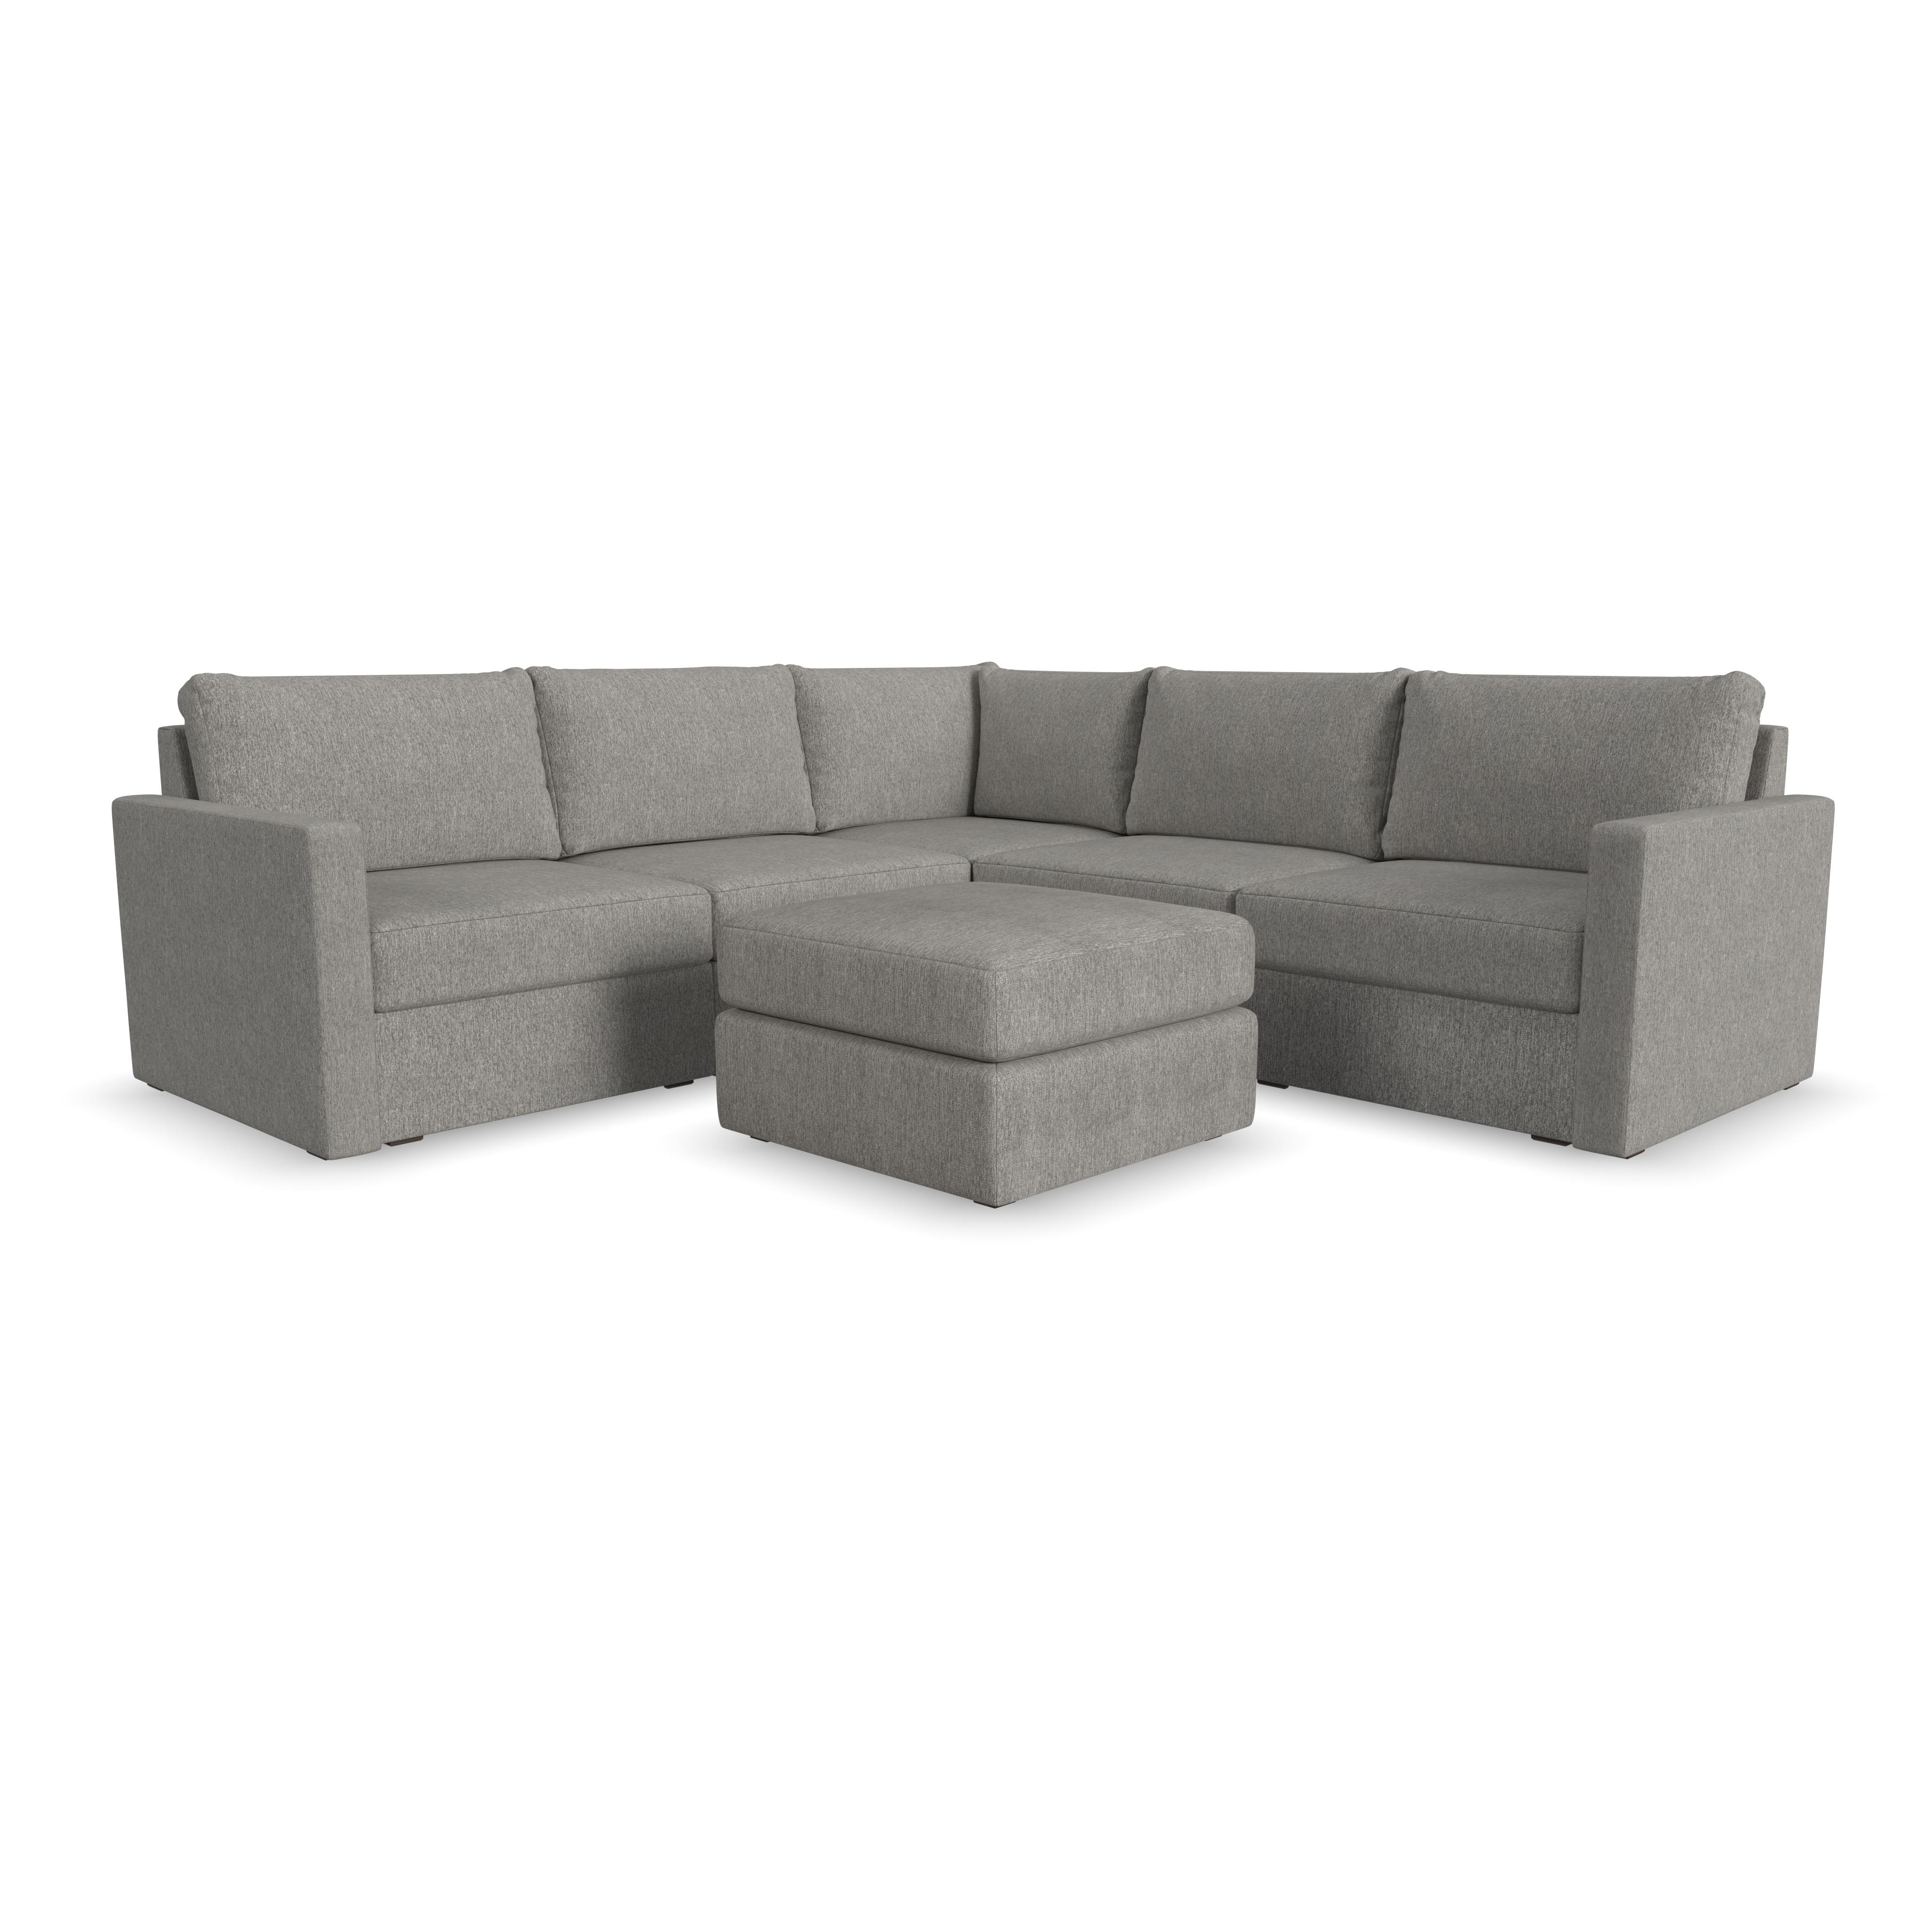 Flexsteel Flex 5-Seat Sectional with Standard Arm and Ottoman